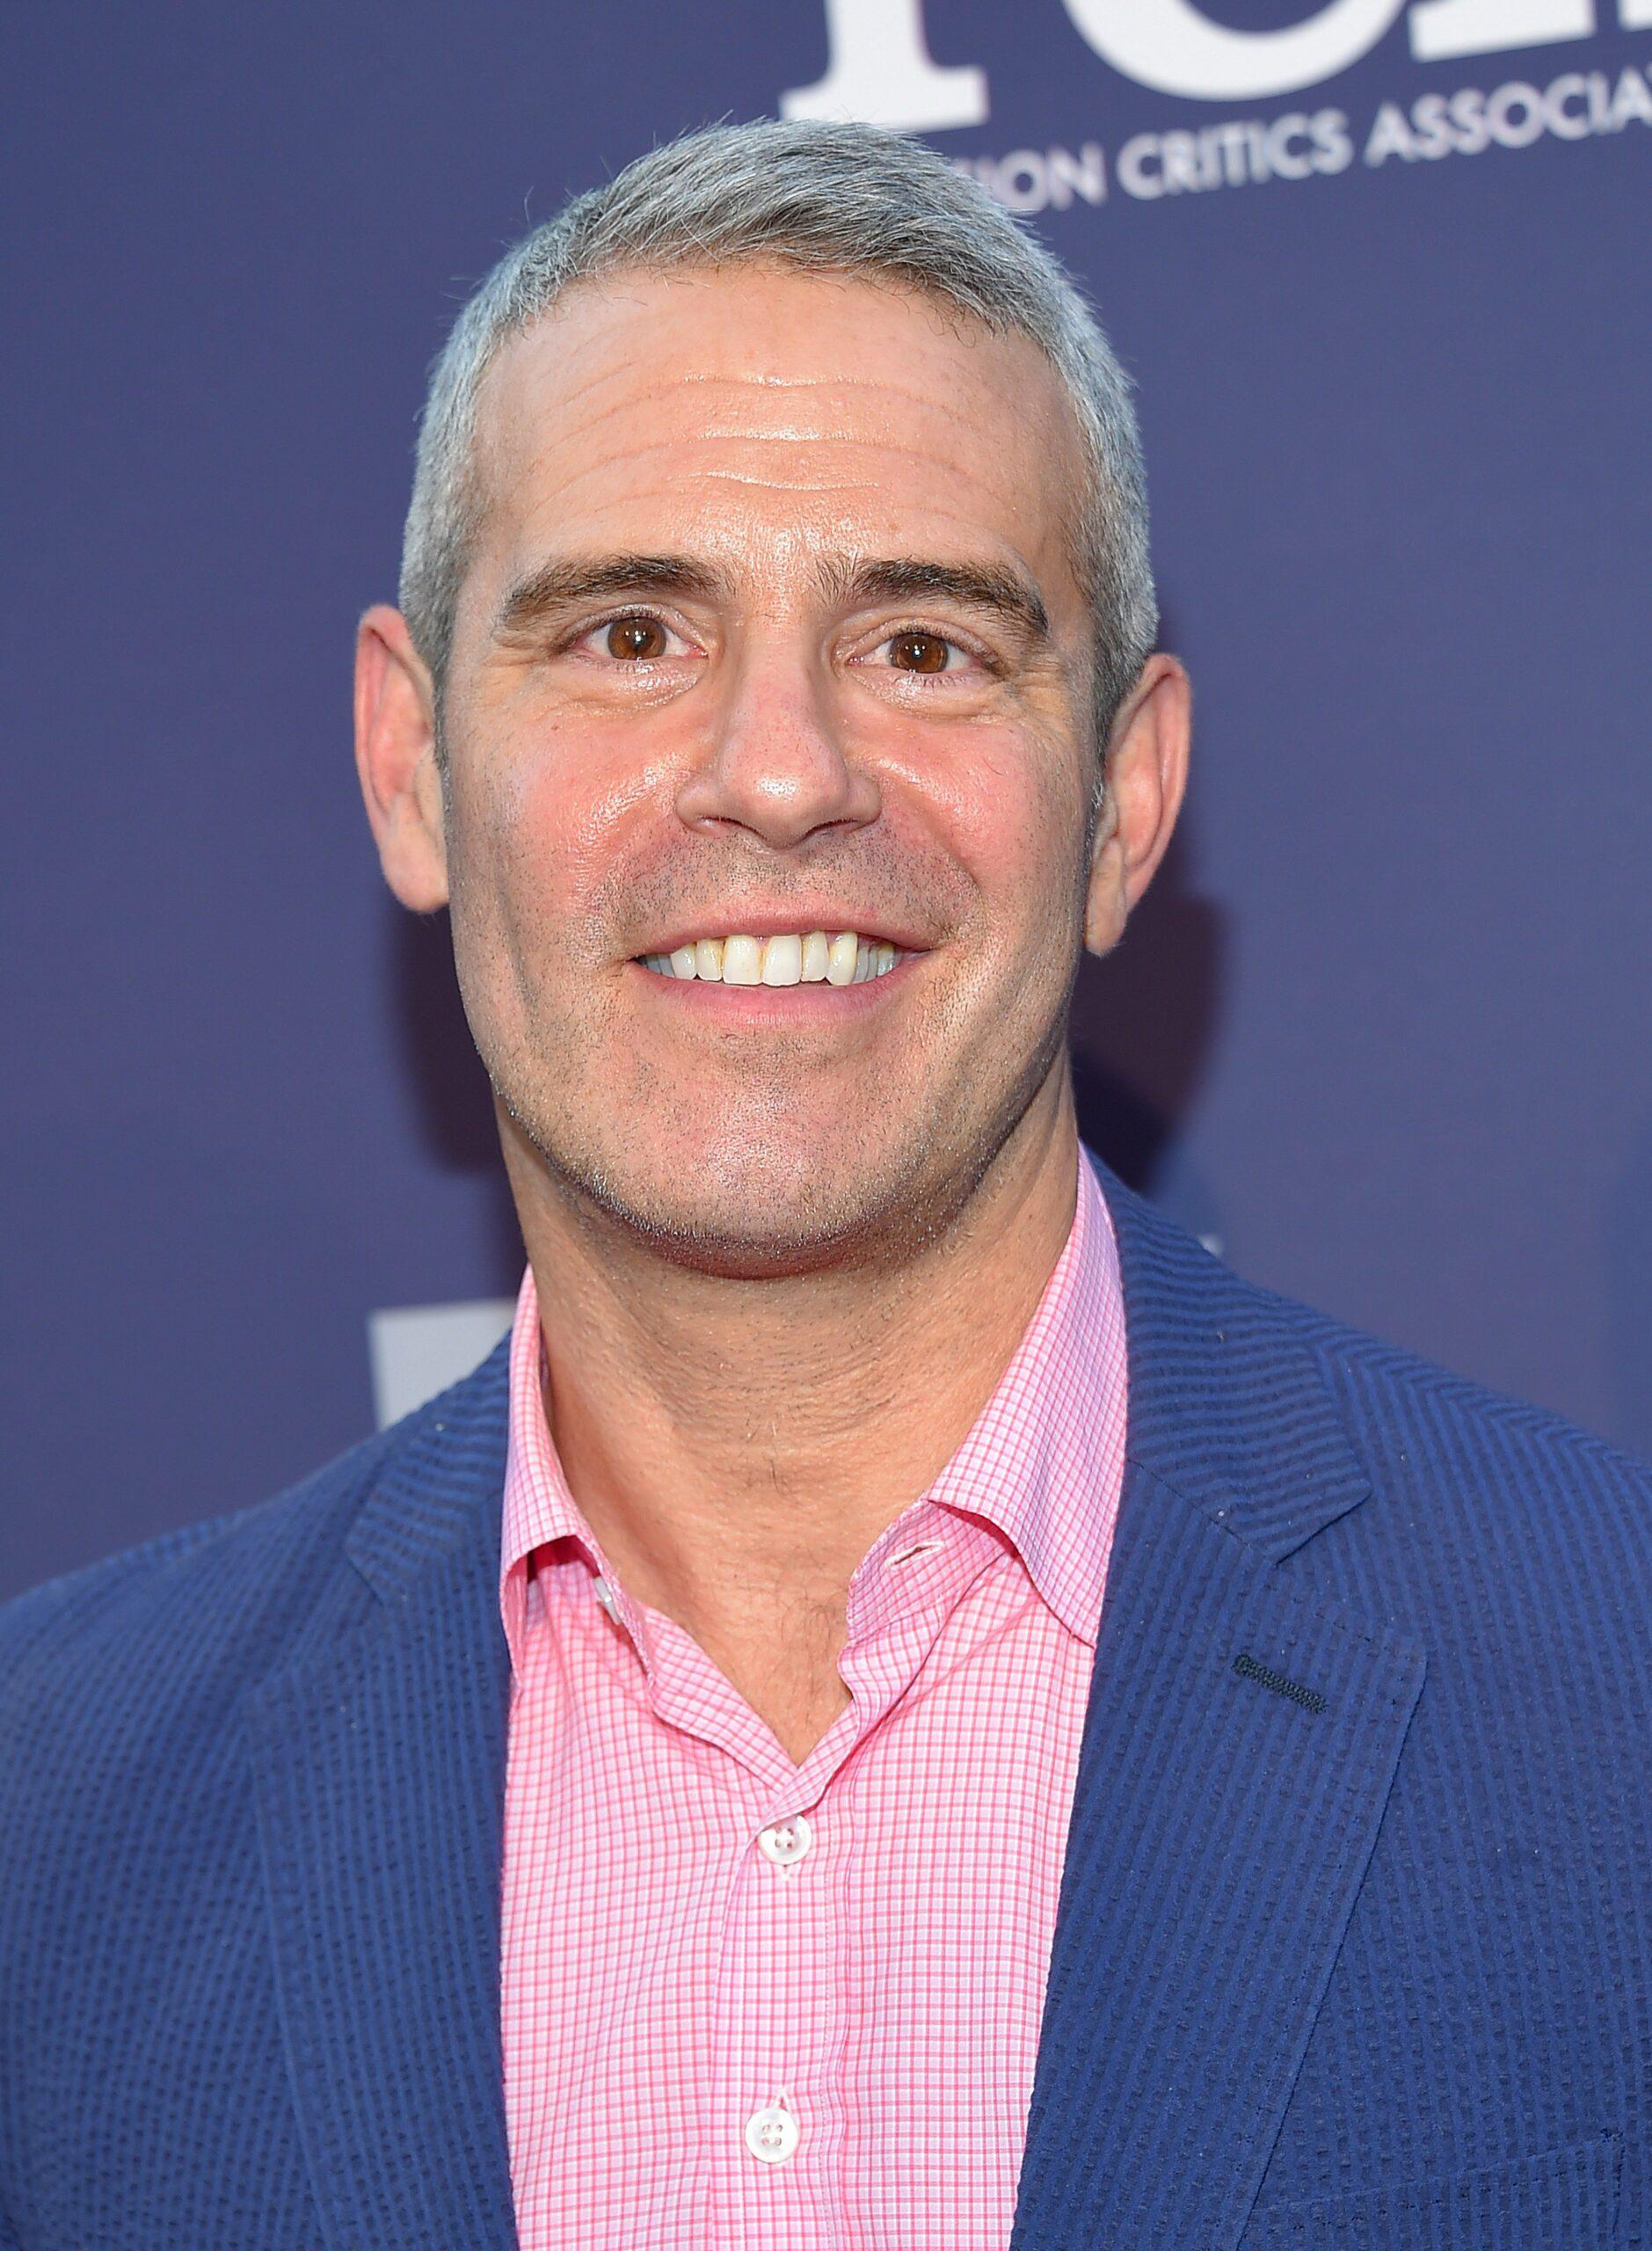 Andy Cohen sports a blue suit and pink inner T-shirt.